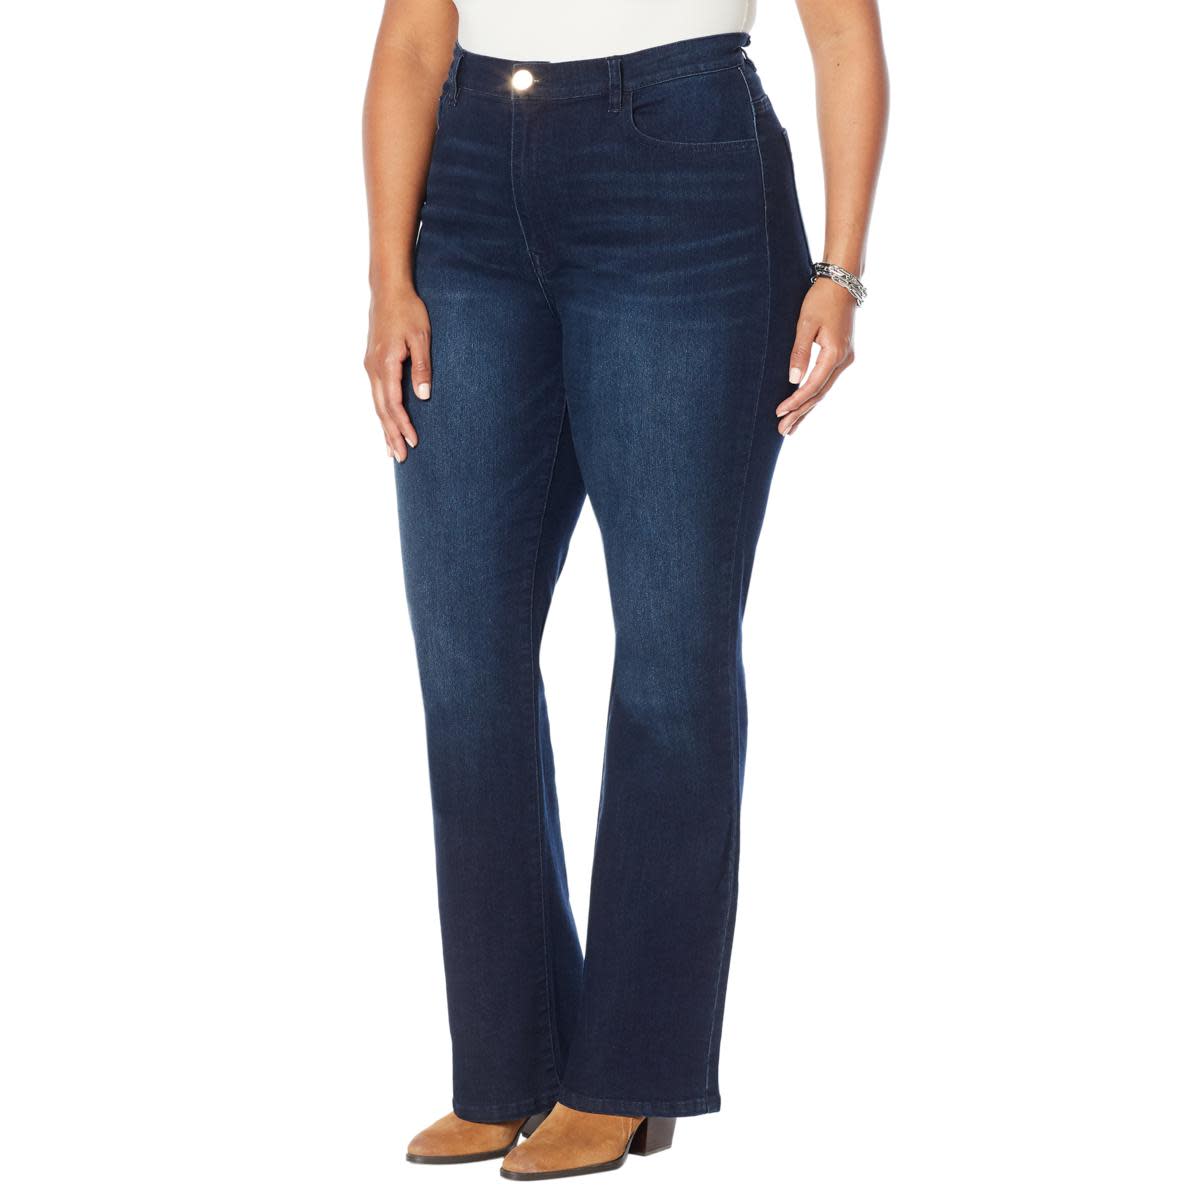 Diane Gilman jeans are on sale at HSN